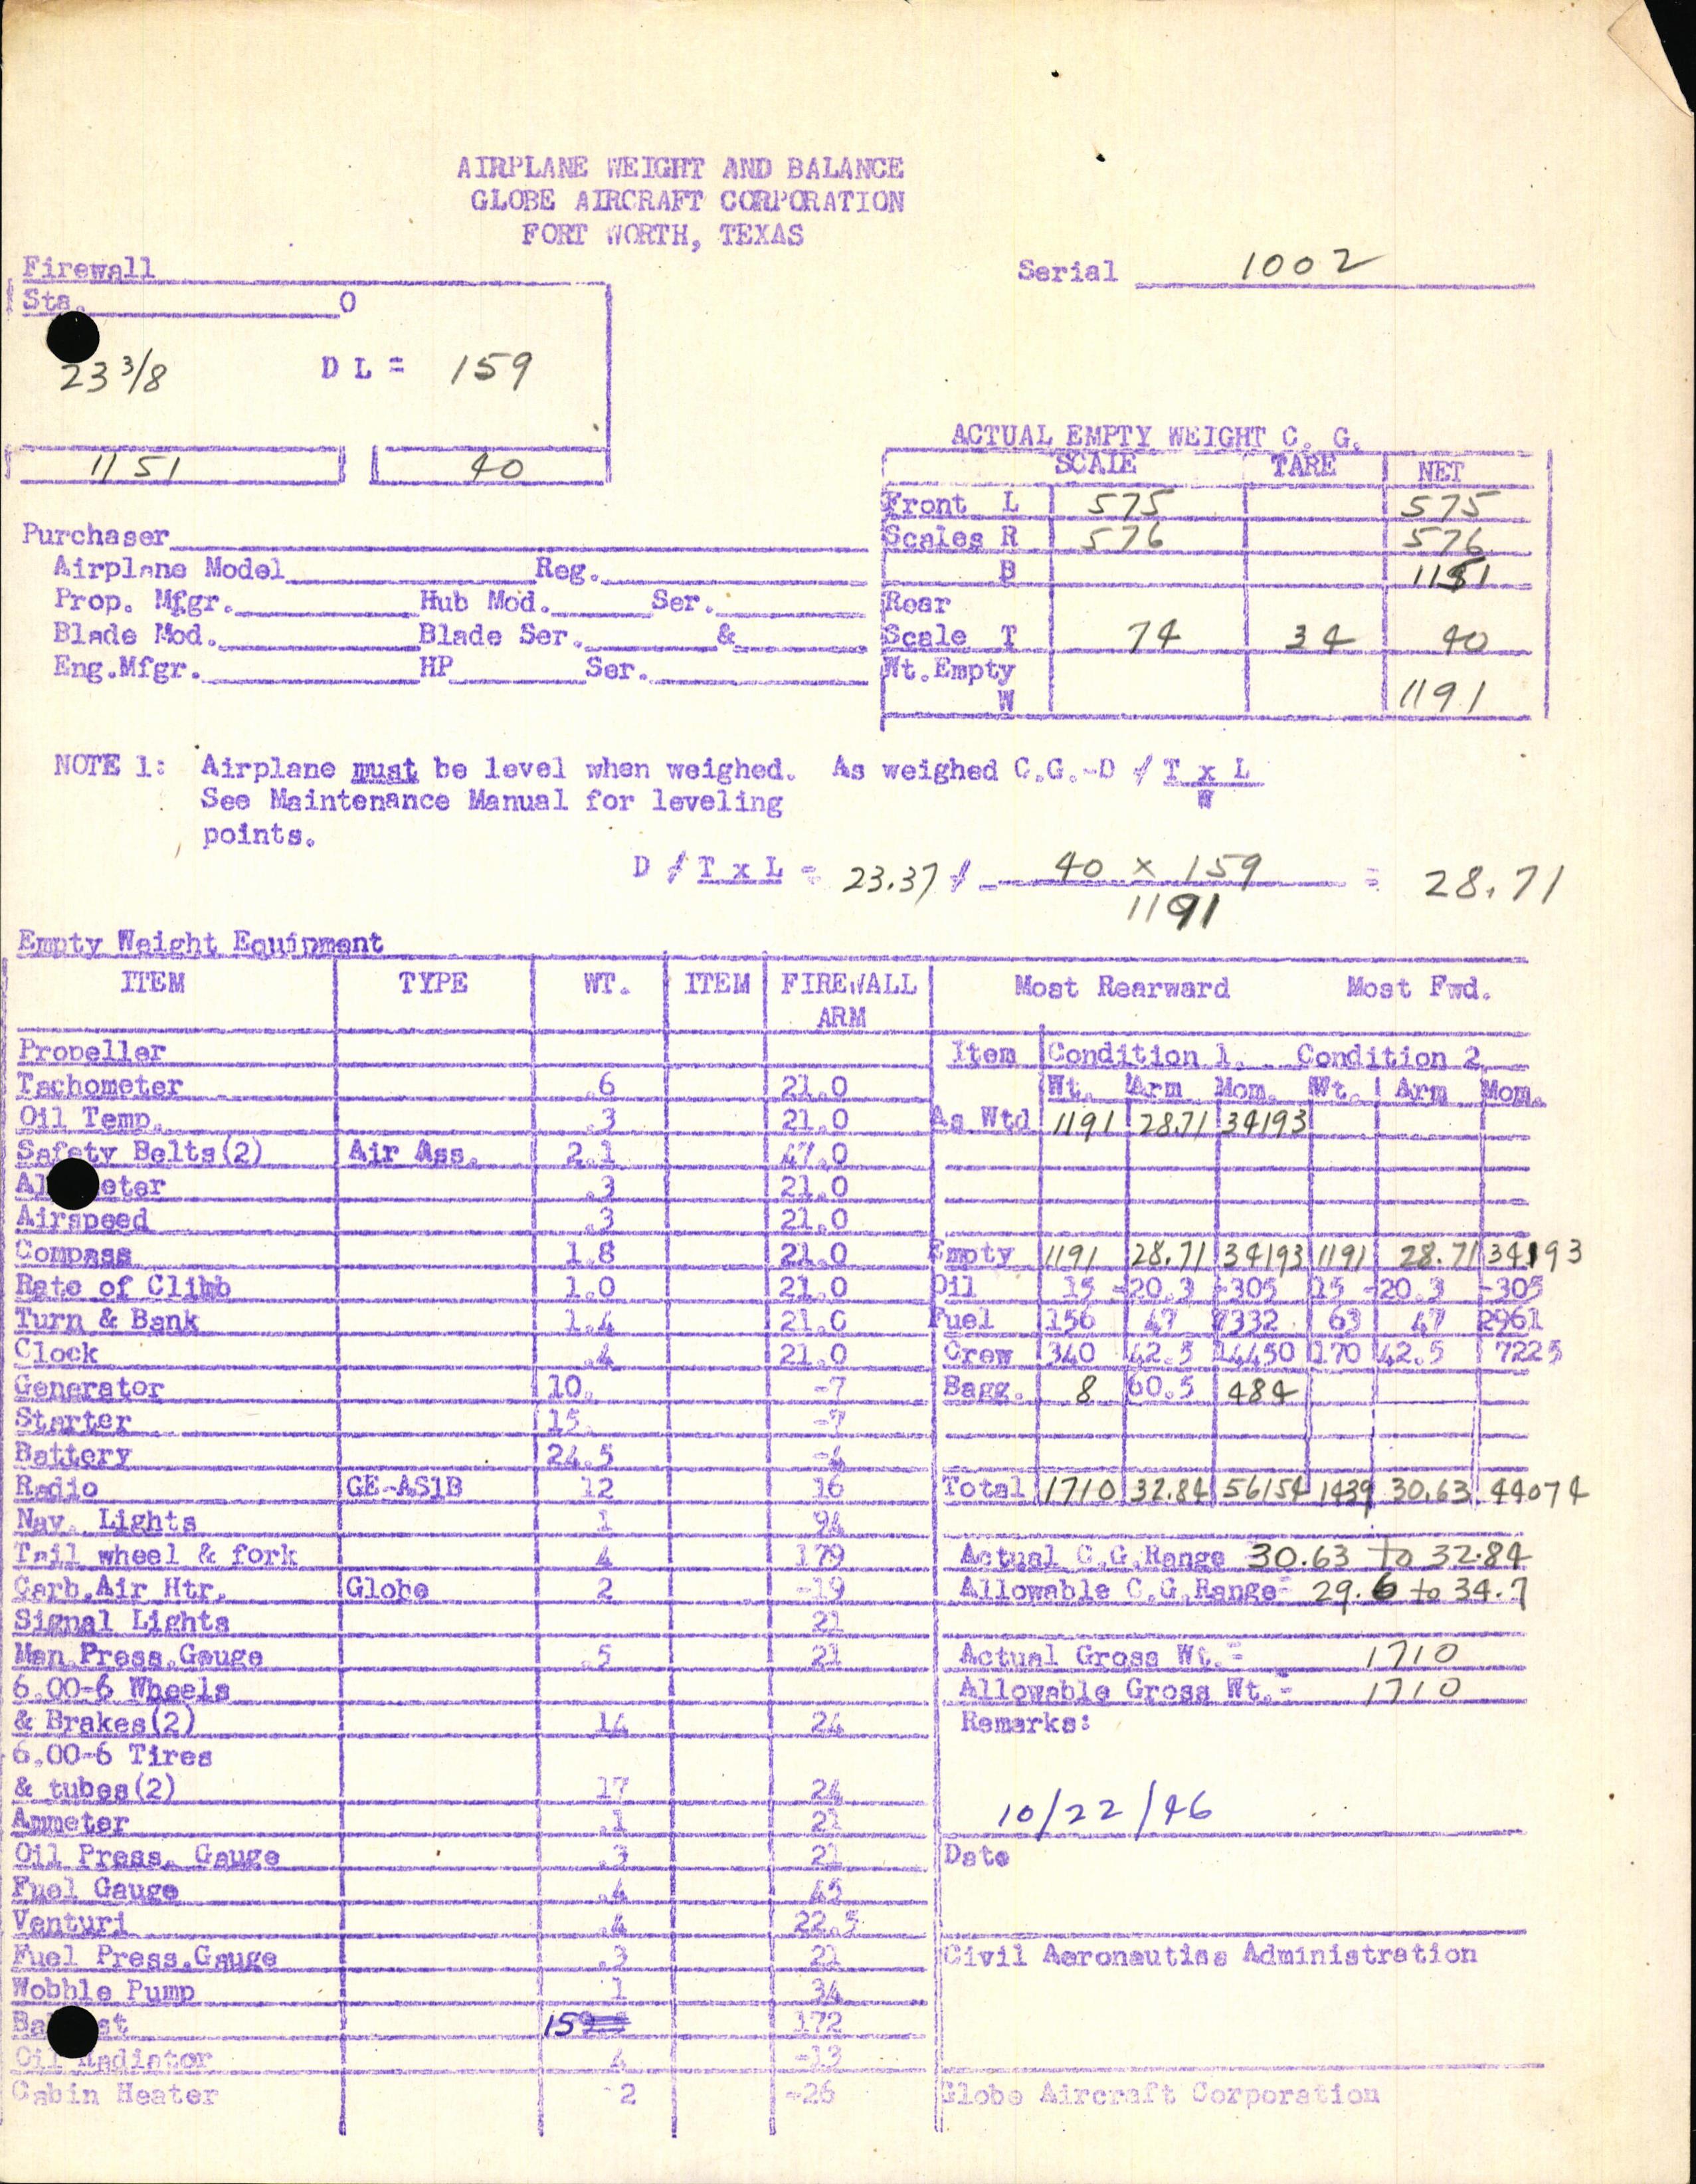 Sample page 5 from AirCorps Library document: Technical Information for Serial Number 1002